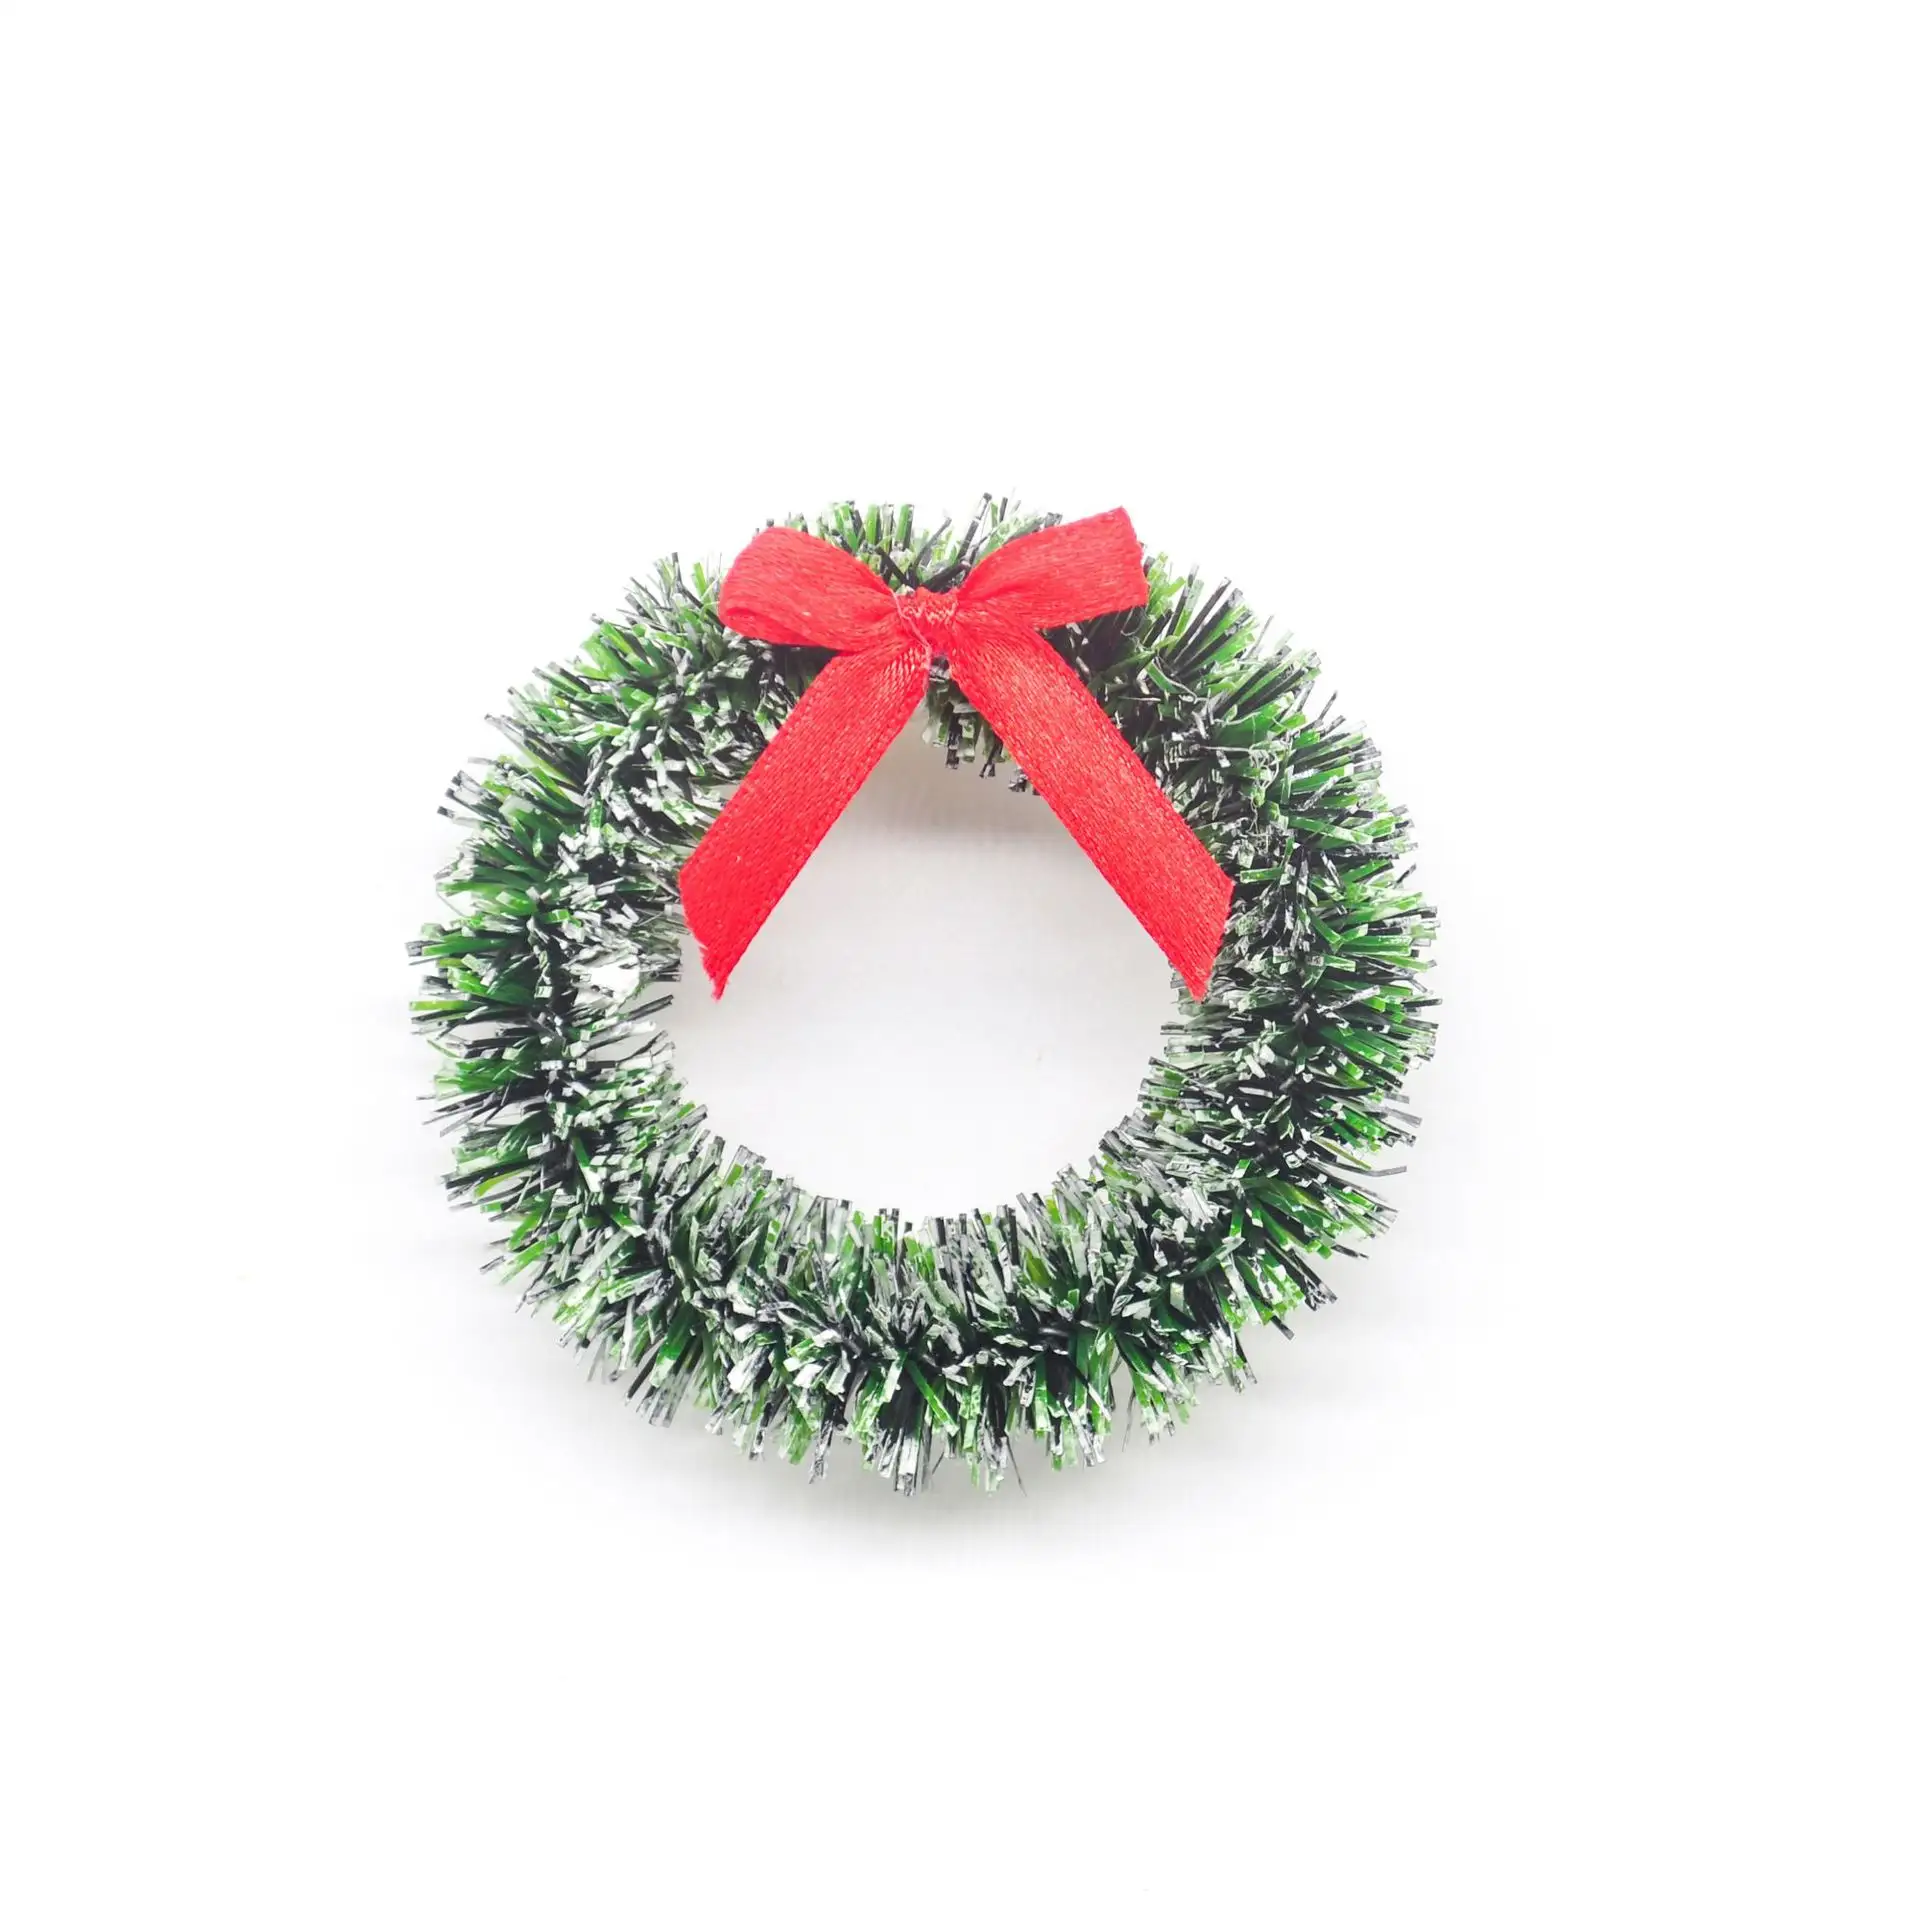 Wreath Christmas Mini Wreaths Rings Artificial Crafts Bowberry Decorations Door Hanging Wall Christmas Wreaths